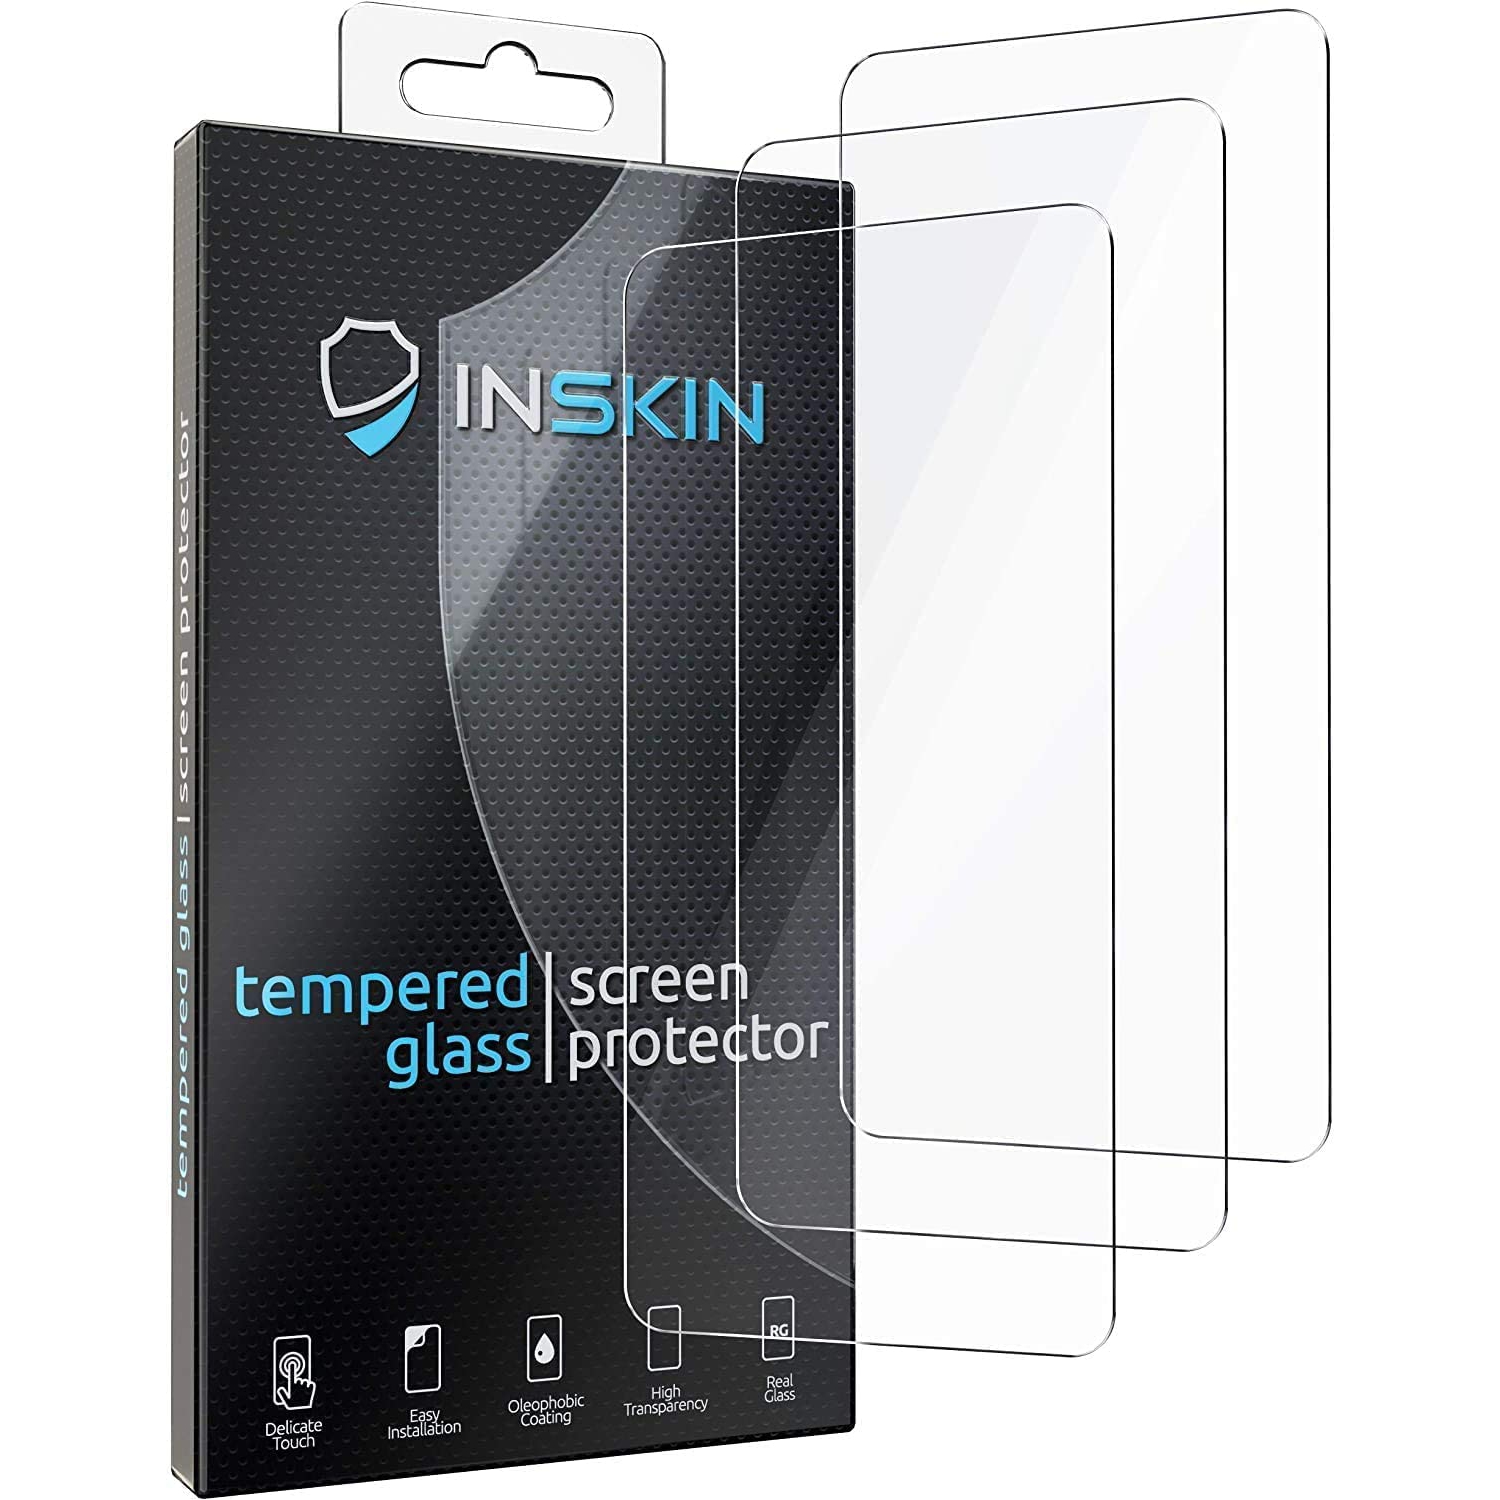 Inskin Case-Friendly Tempered Glass Screen Protector, fits Motorola Moto G Pure 6.5 inch [2021]. 3-Pack.